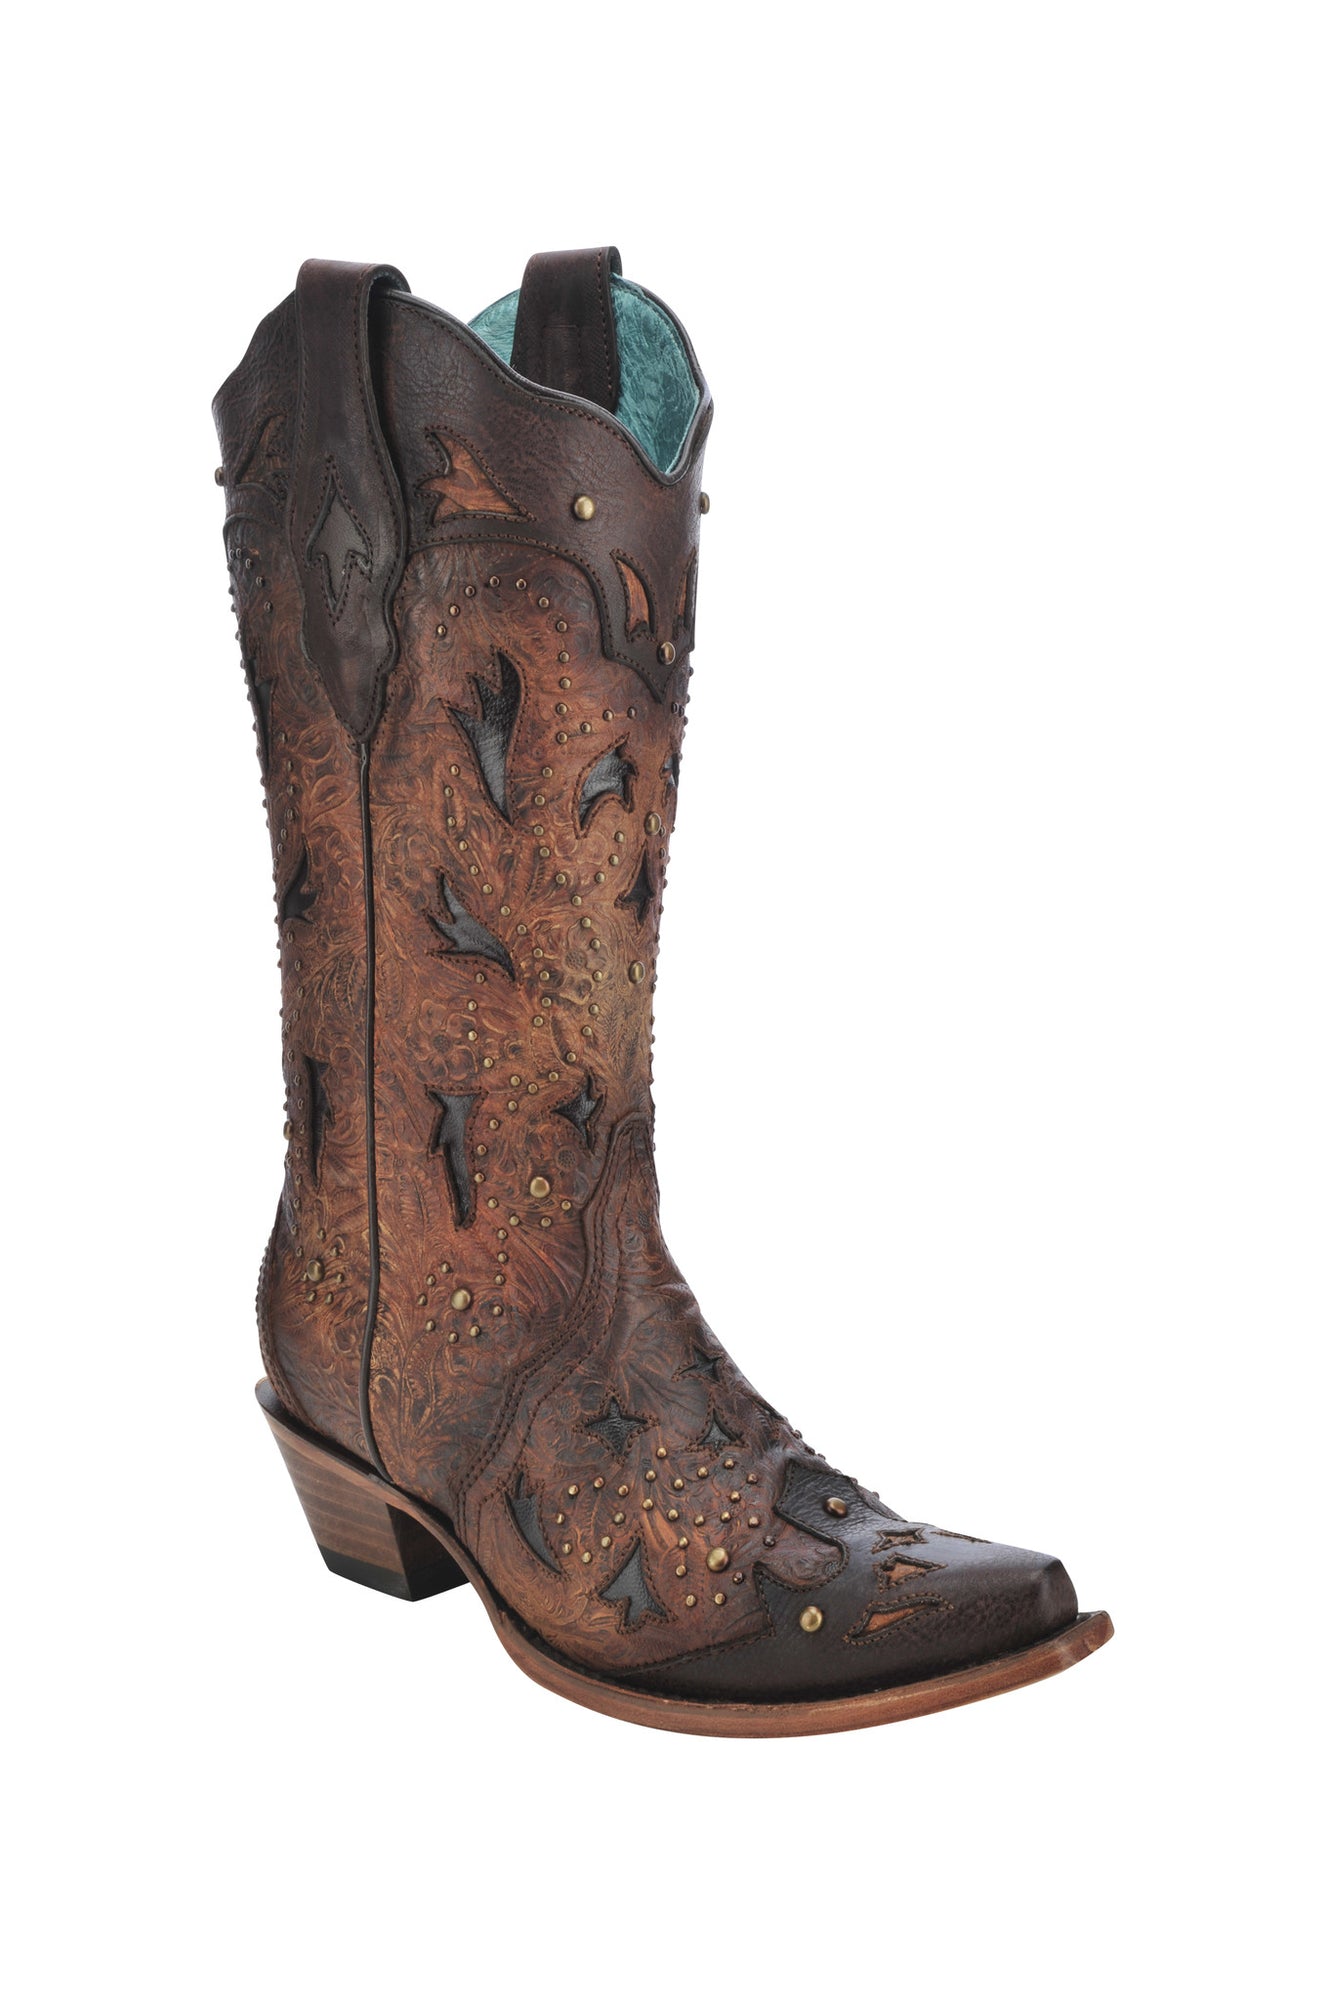 Ladies’ Corral Brown Embossed and Studded Snip Toe Boot